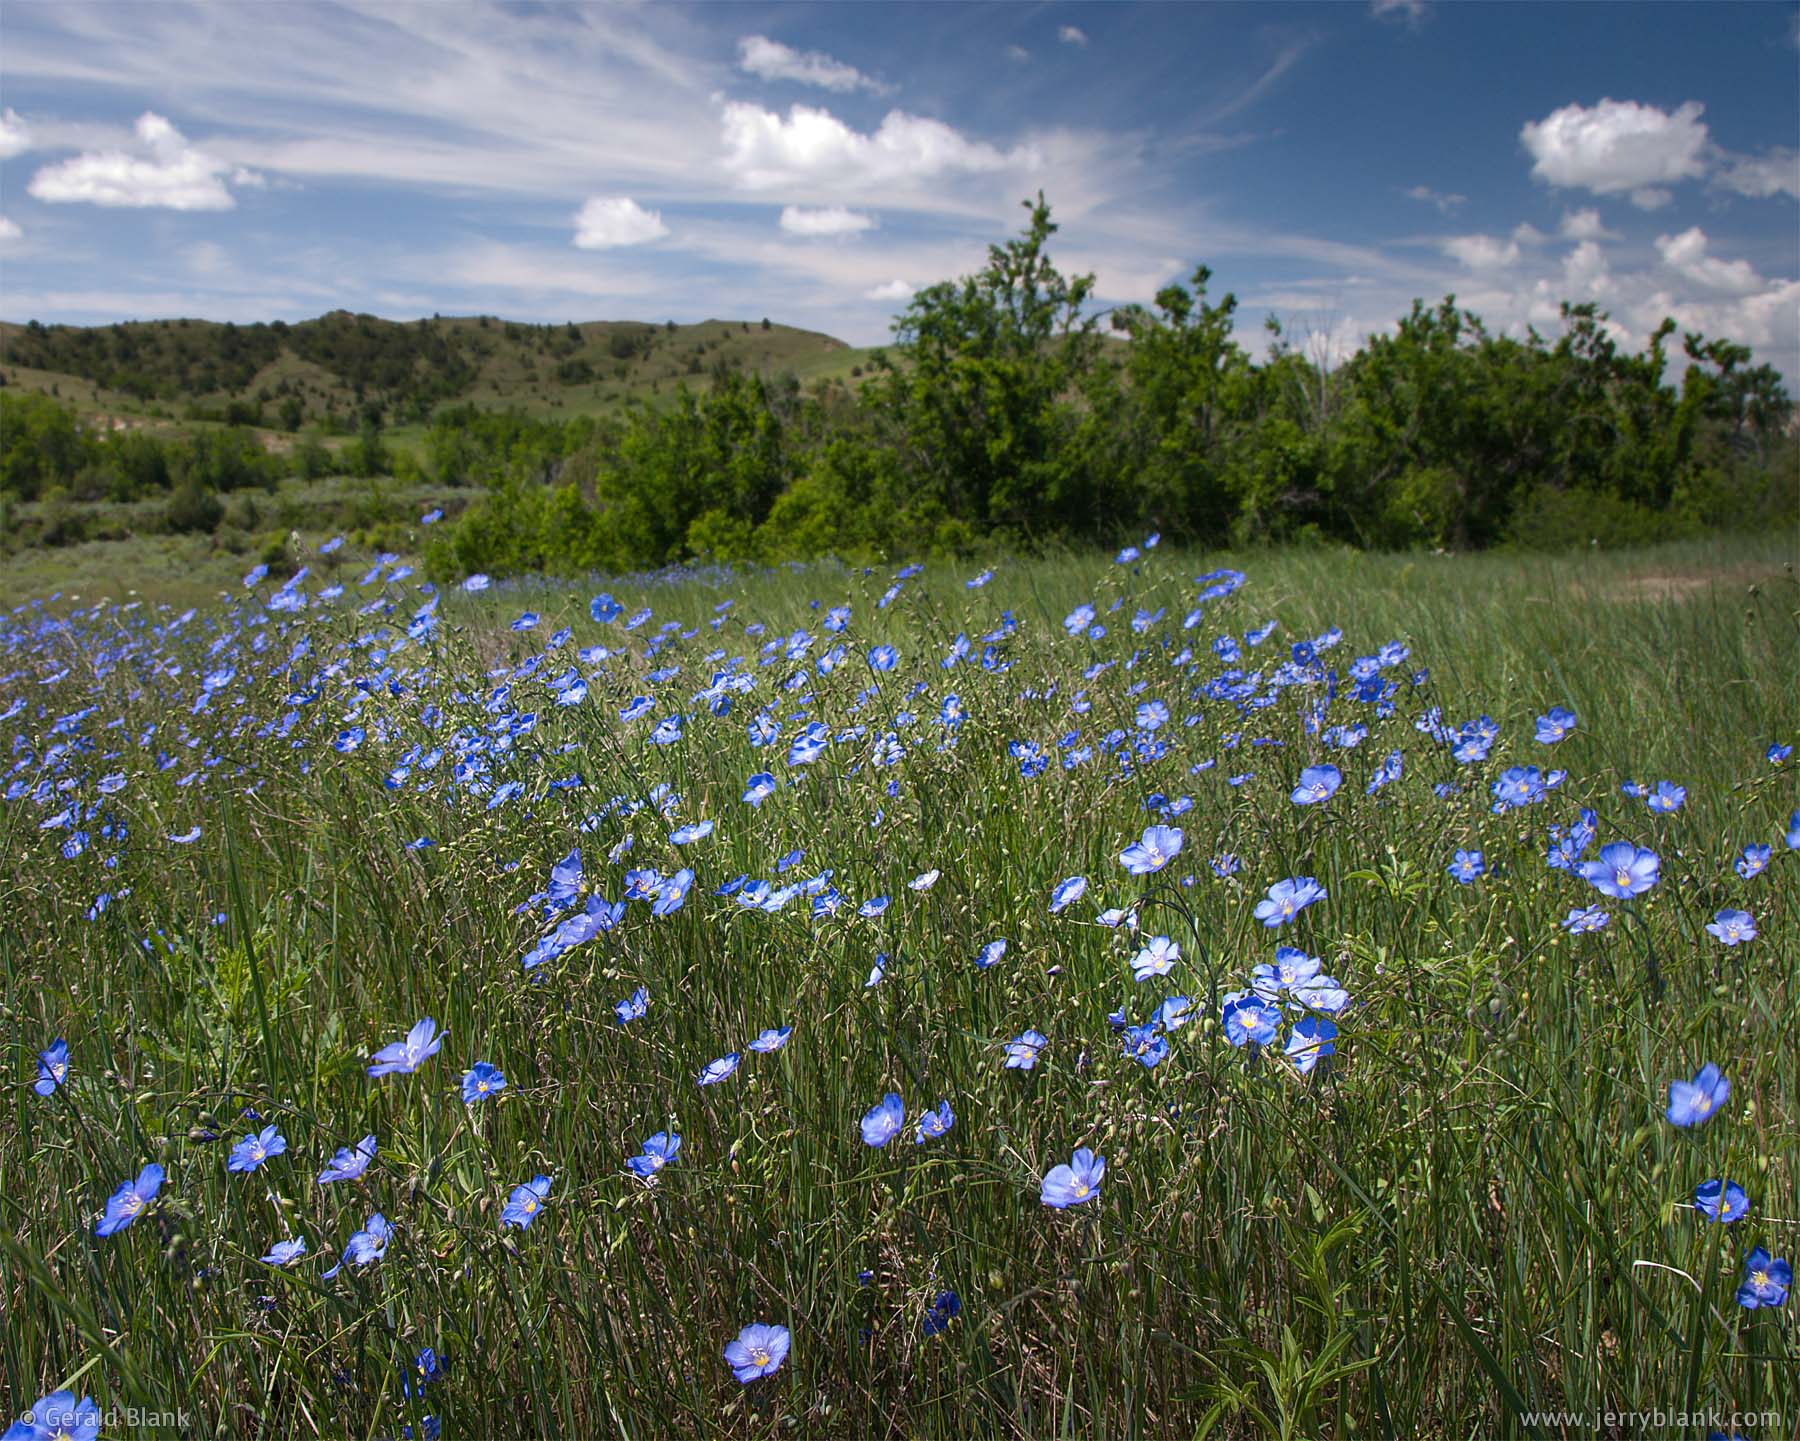 #00210 - In late spring, wild blue flax (Linum lewisii) fills a meadow in the Little Missouri River bottom, Billings County, North Dakota - photo by Jerry Blank